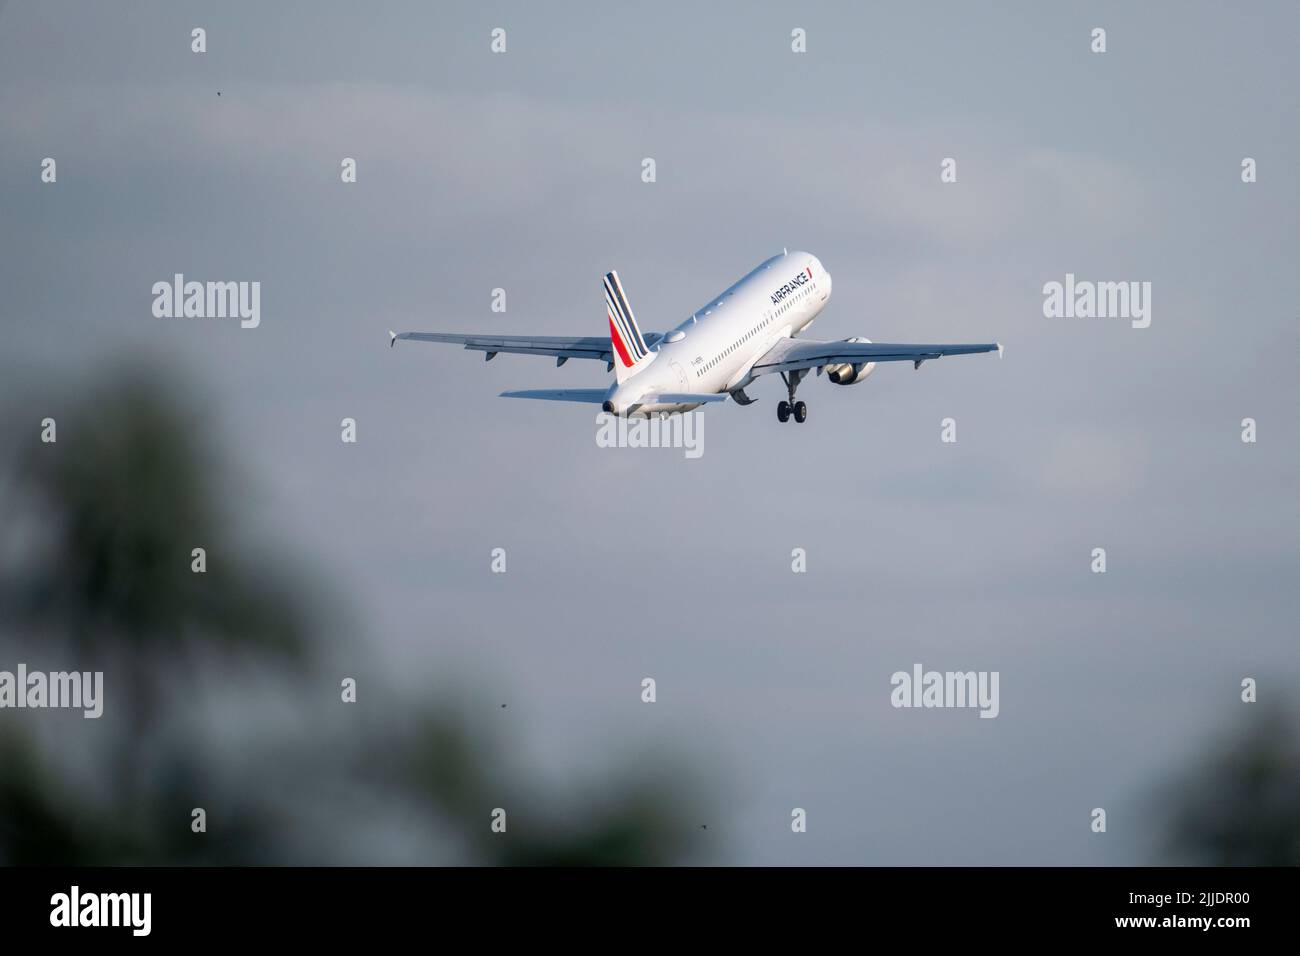 Copenhagen / DENMARK - JULY 22, 2022: Airbus A320, operated by Air France,  taking off from the Copenhagen airport CPH. Registration F-HEPB Stock Photo